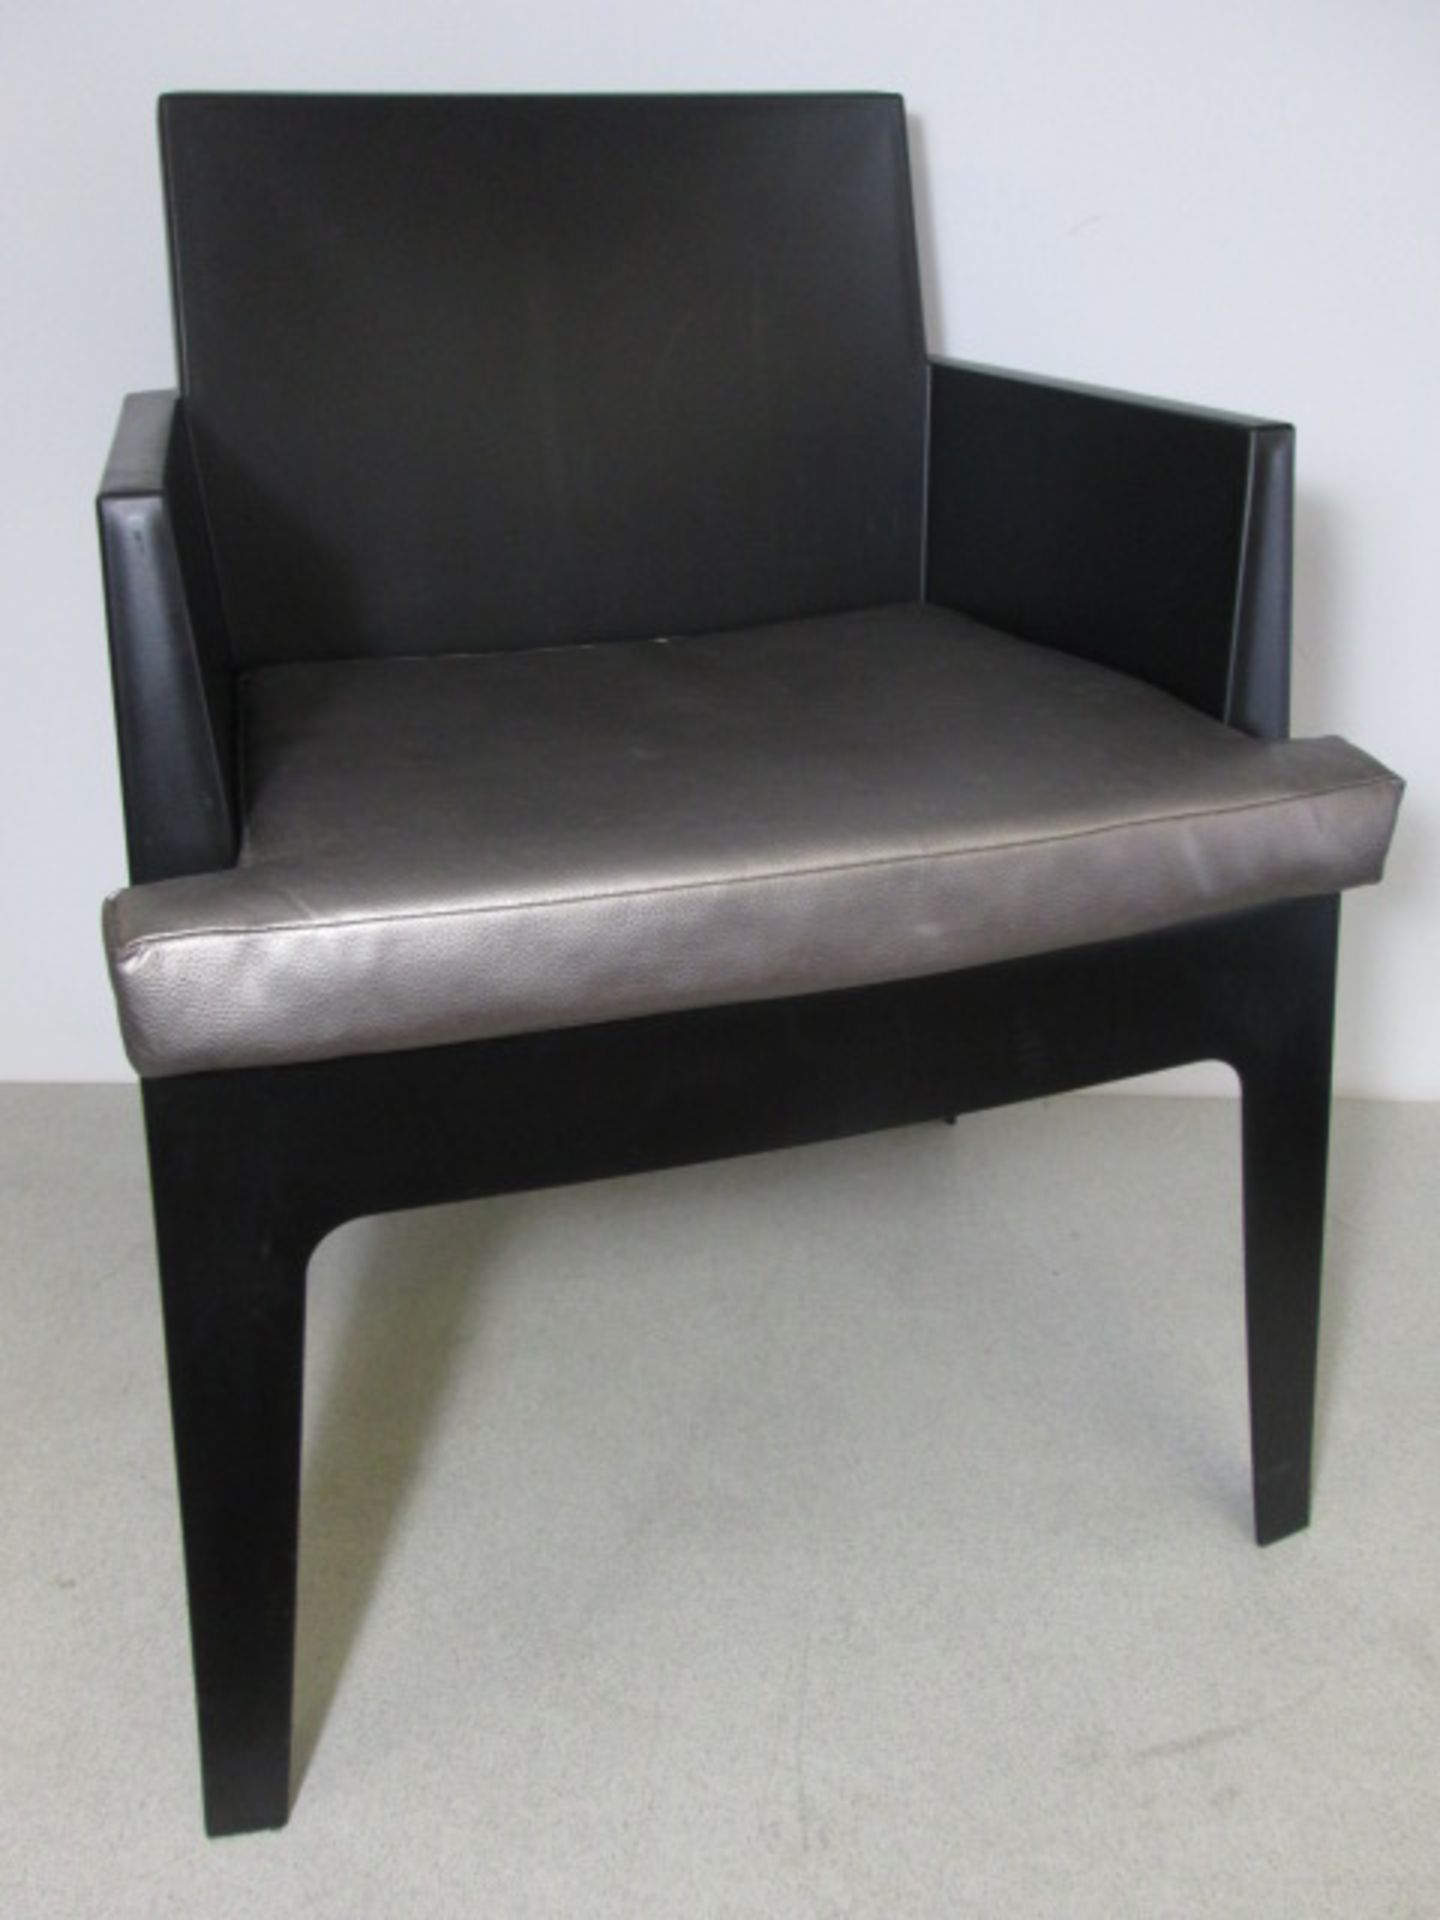 4 x Siesta Recyclable Polypropylene Stacking Outdoor Armchair in Matt Black, Model 058 Box. Comes - Image 4 of 8